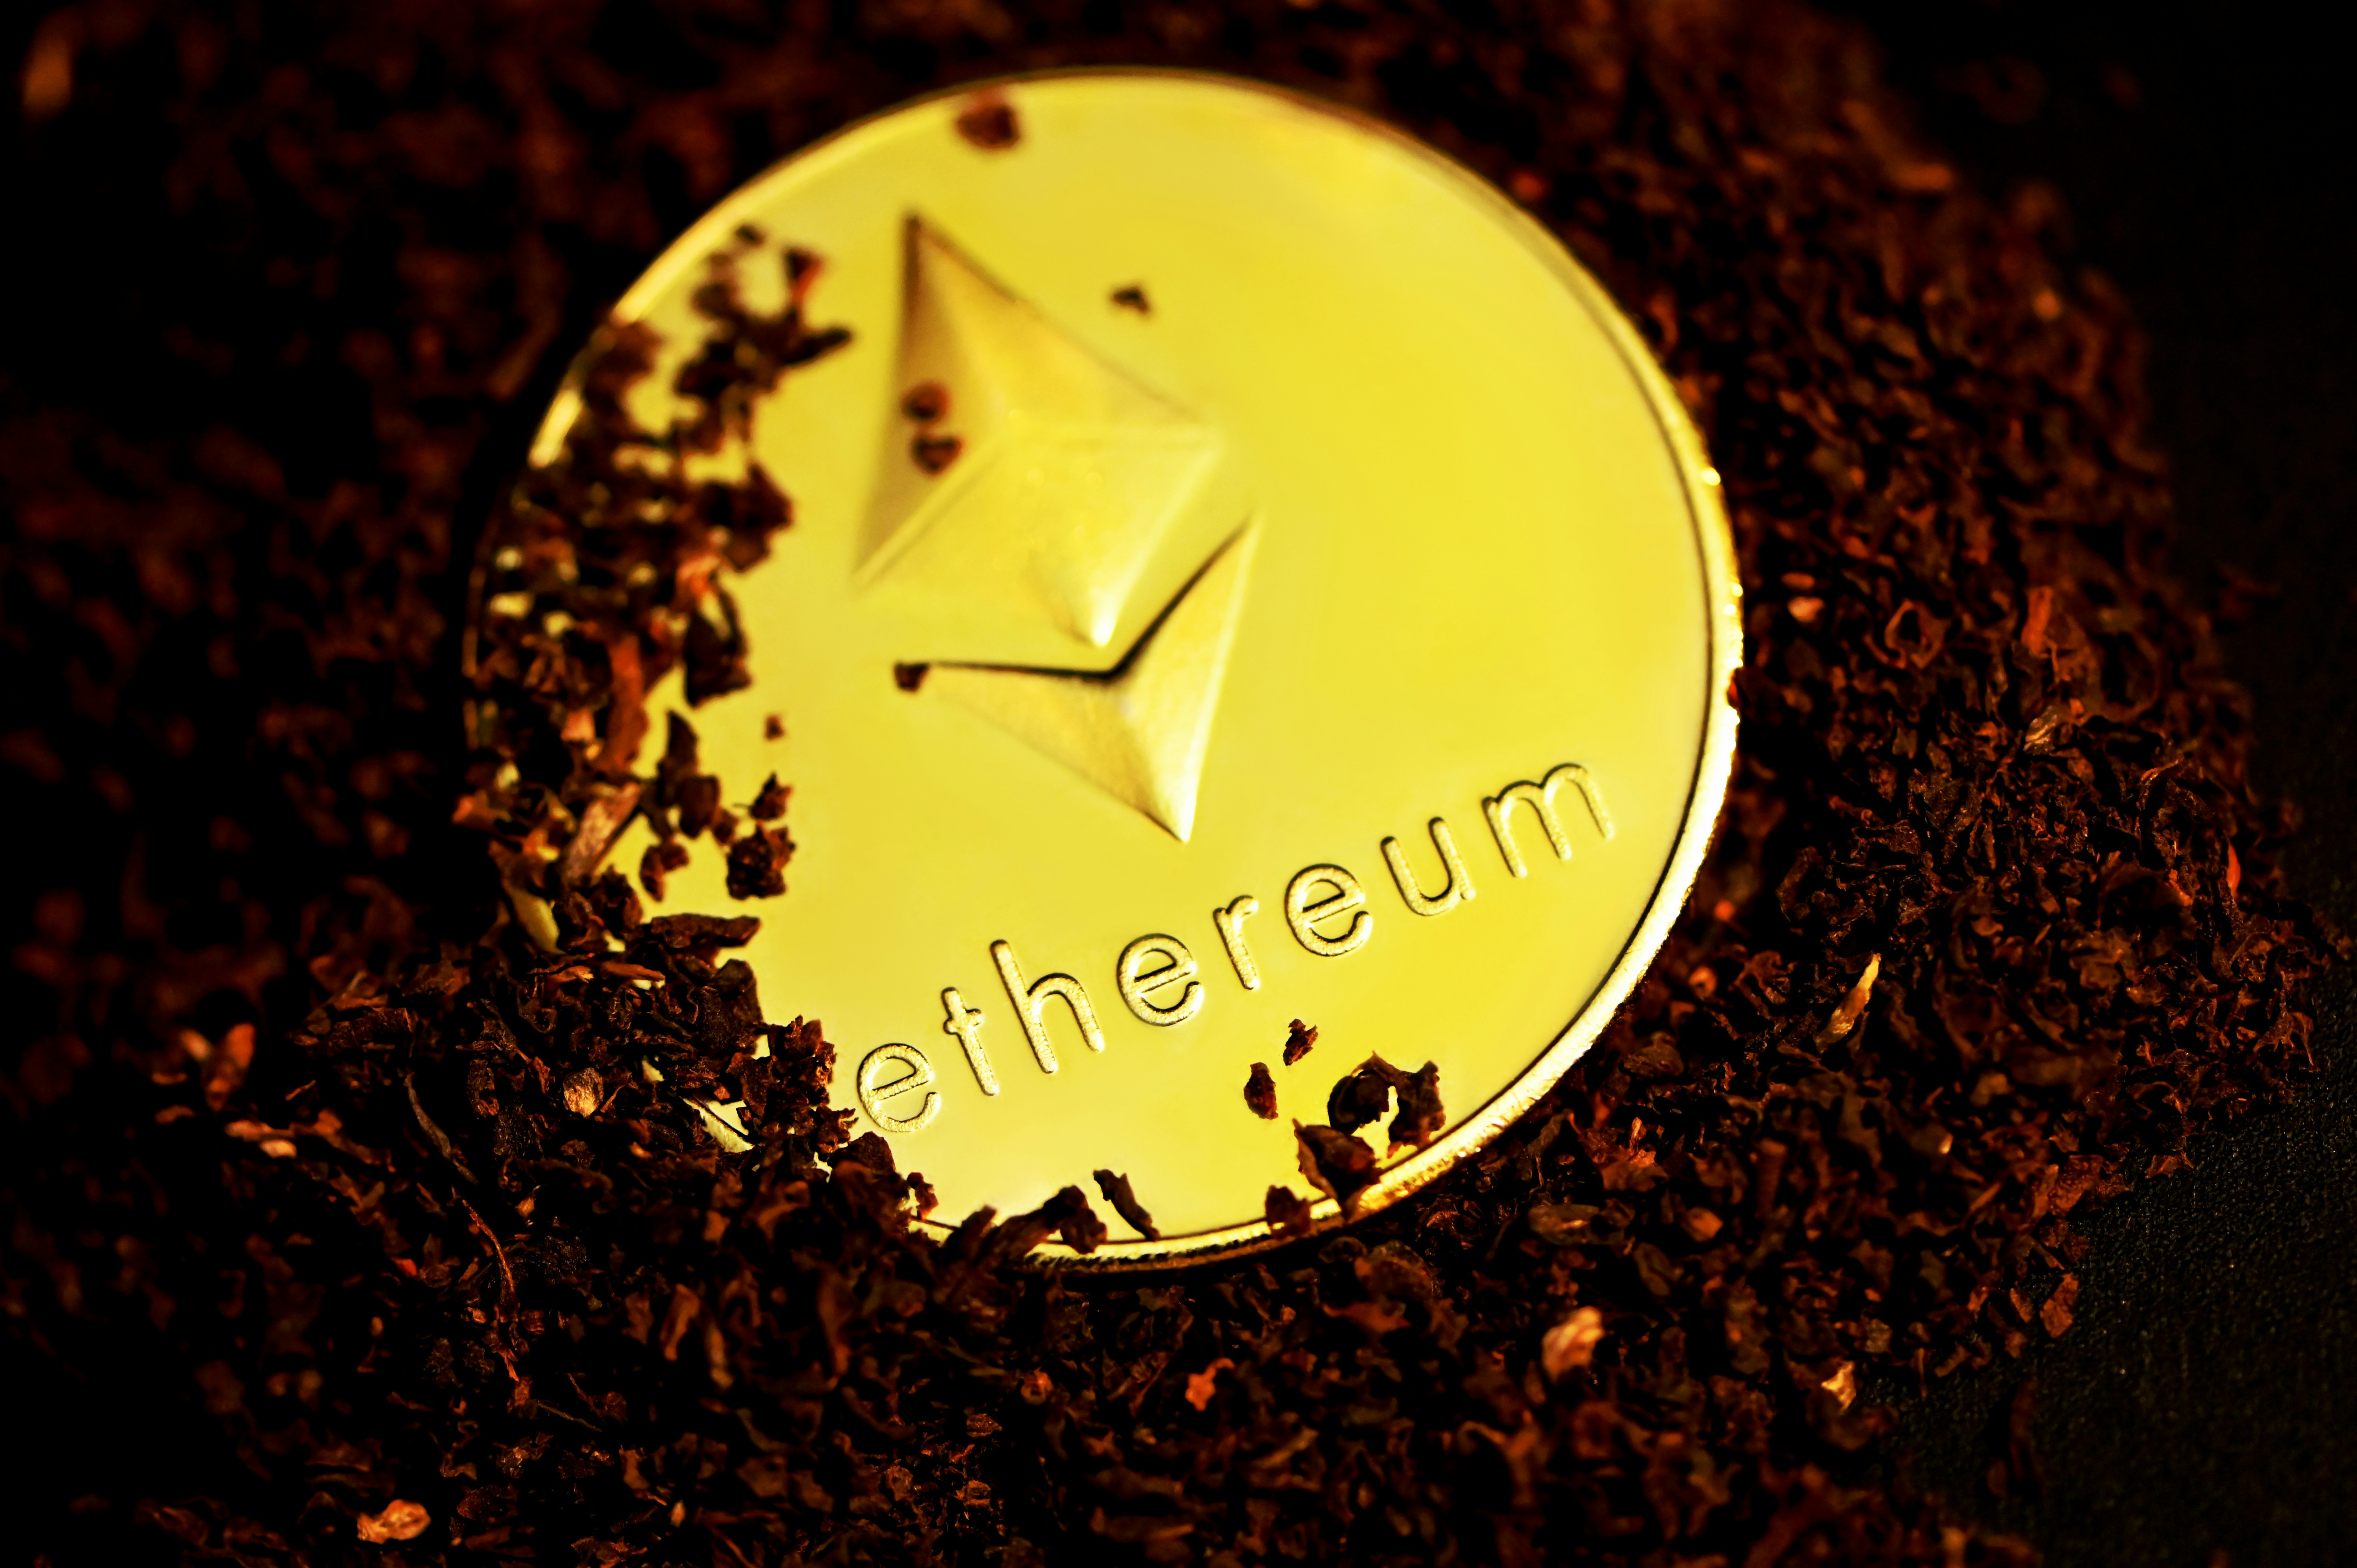 Ethereum is shining in the dried tea